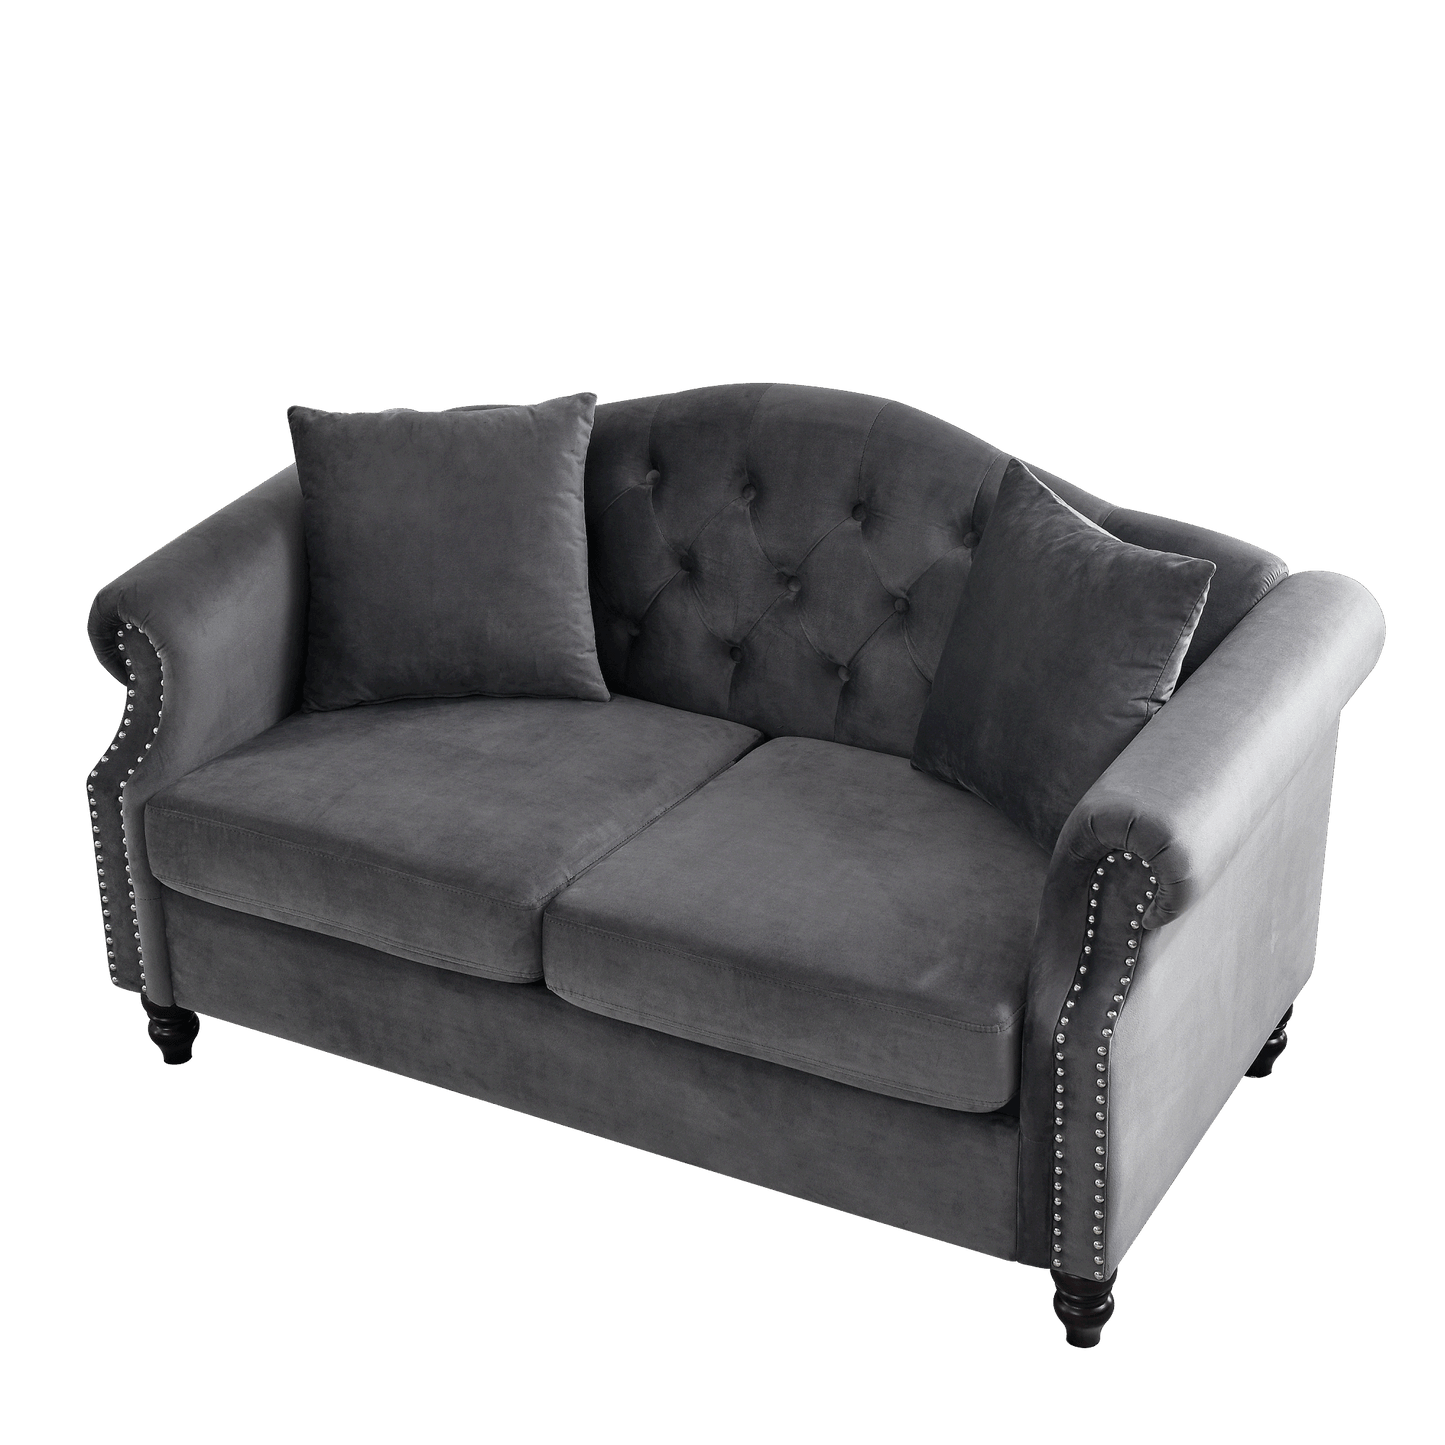 57" Chesterfield Sofa Grey Velvet for Living Room, 2 Seater Sofa Tufted Couch with Rolled Arms and Nailhead for Living Room, Bedroom, Office, Apartment, two pillows